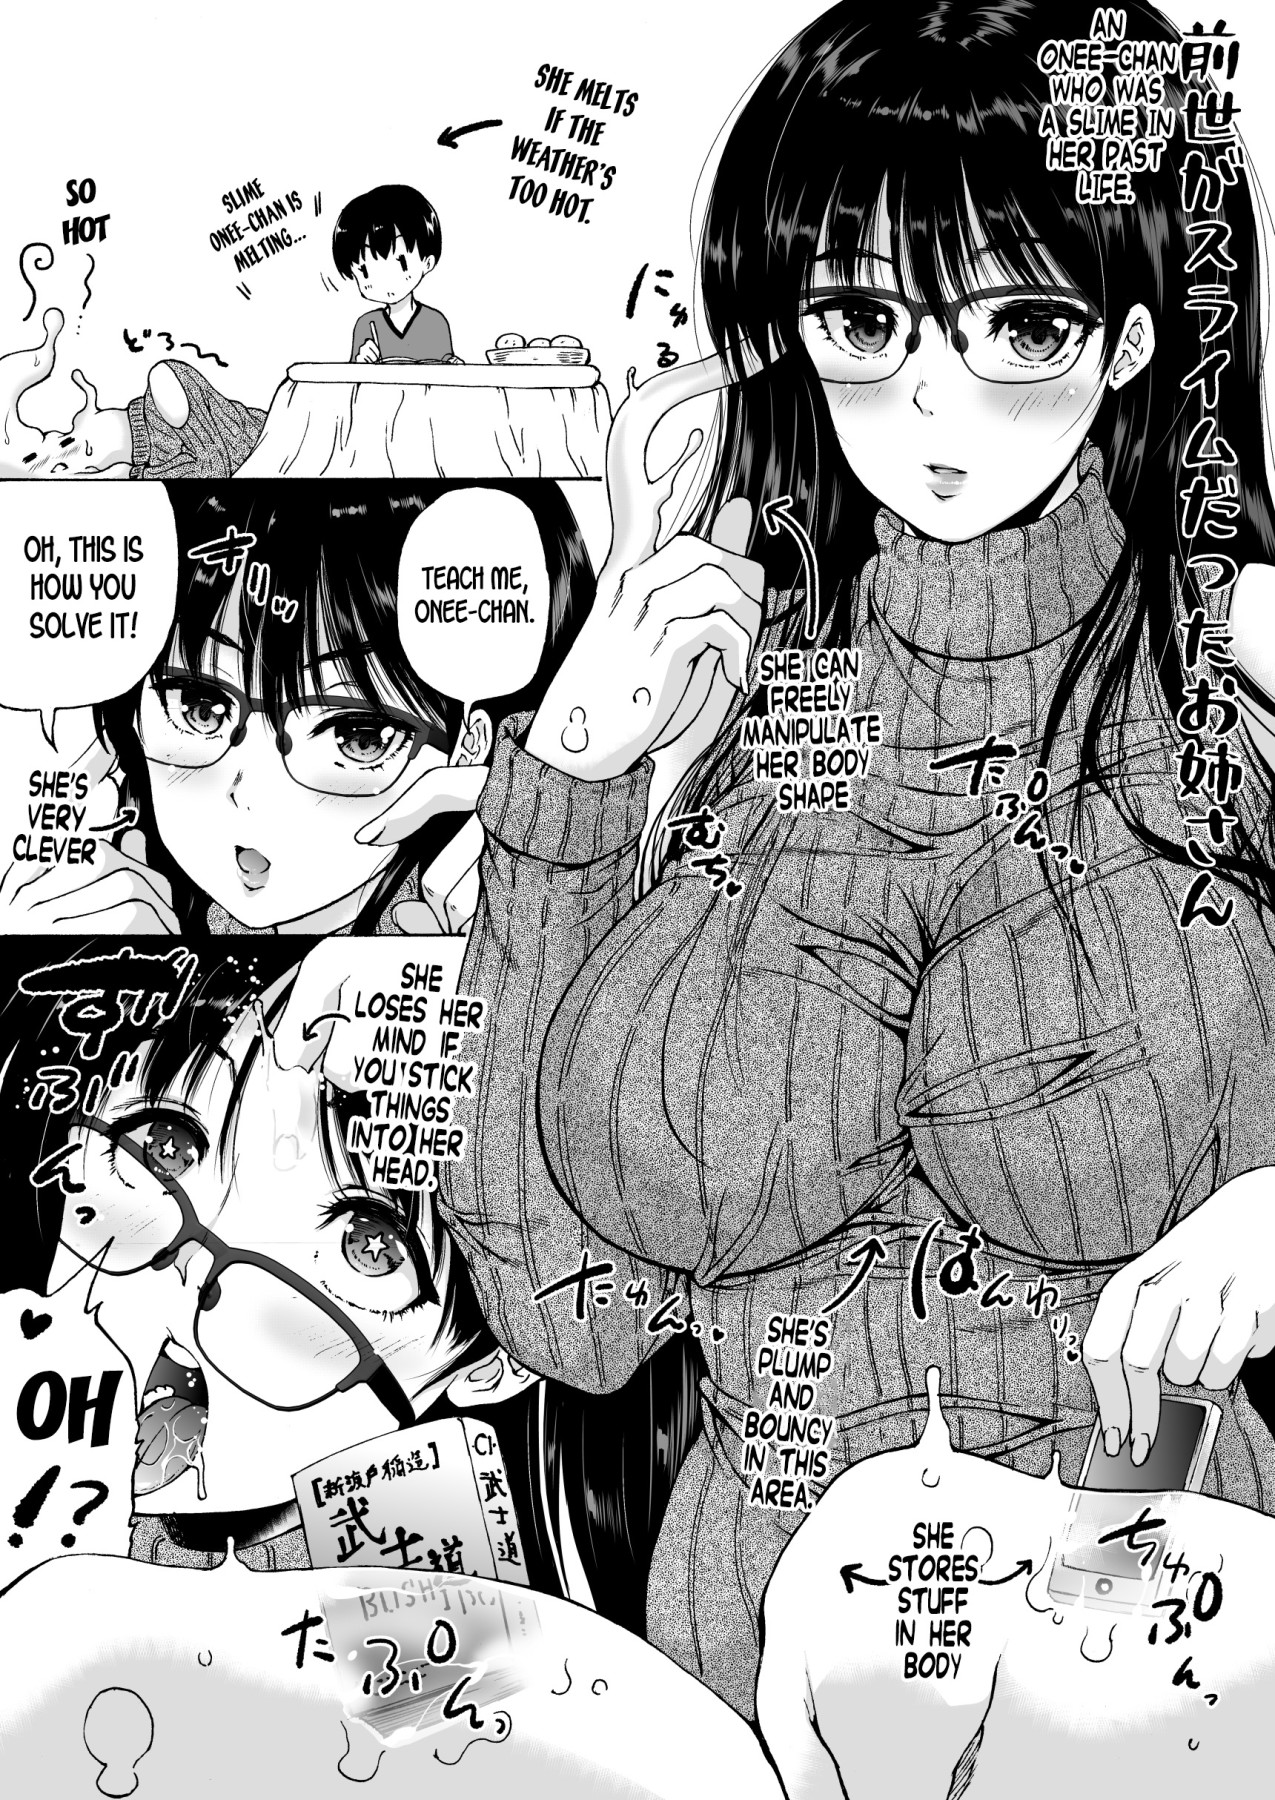 Hentai Manga Comic-The Story Of An Onee-san Who Was A Slime In Her Previous life-Read-1